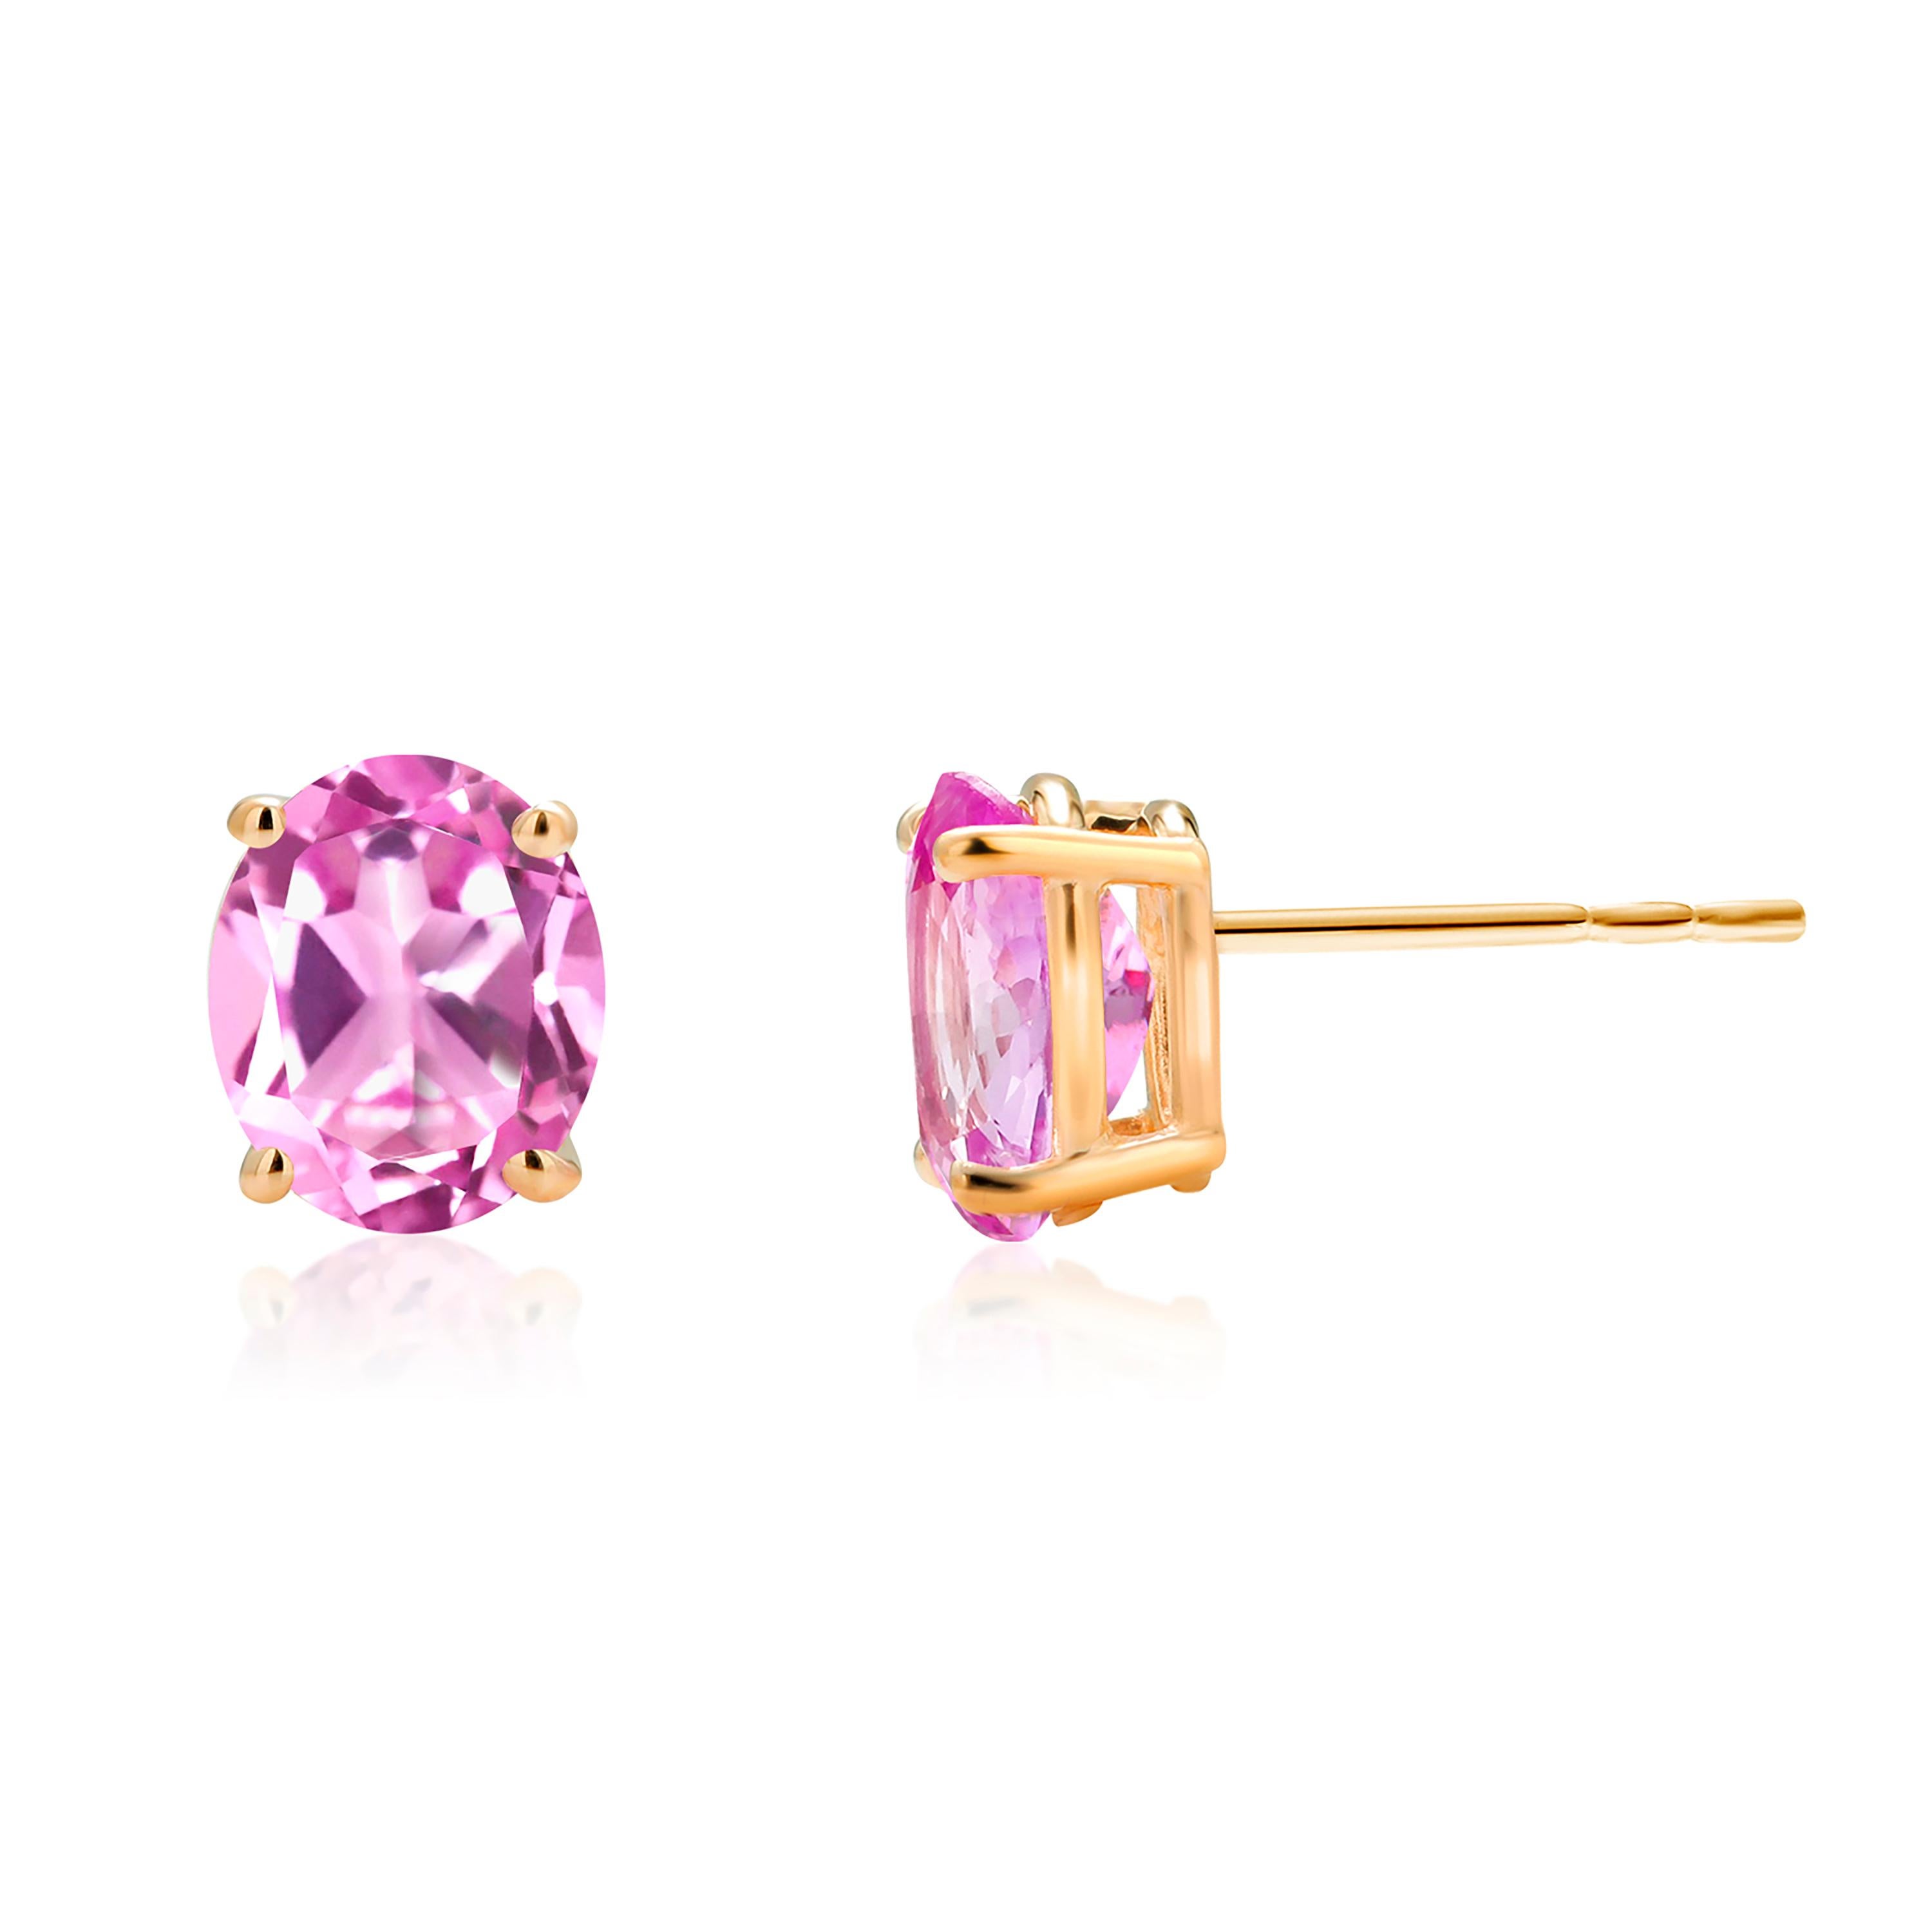 Oval Shaped Mini Ceylon Pink Sapphires Set in Yellow Gold Stud Earrings For Sale 4